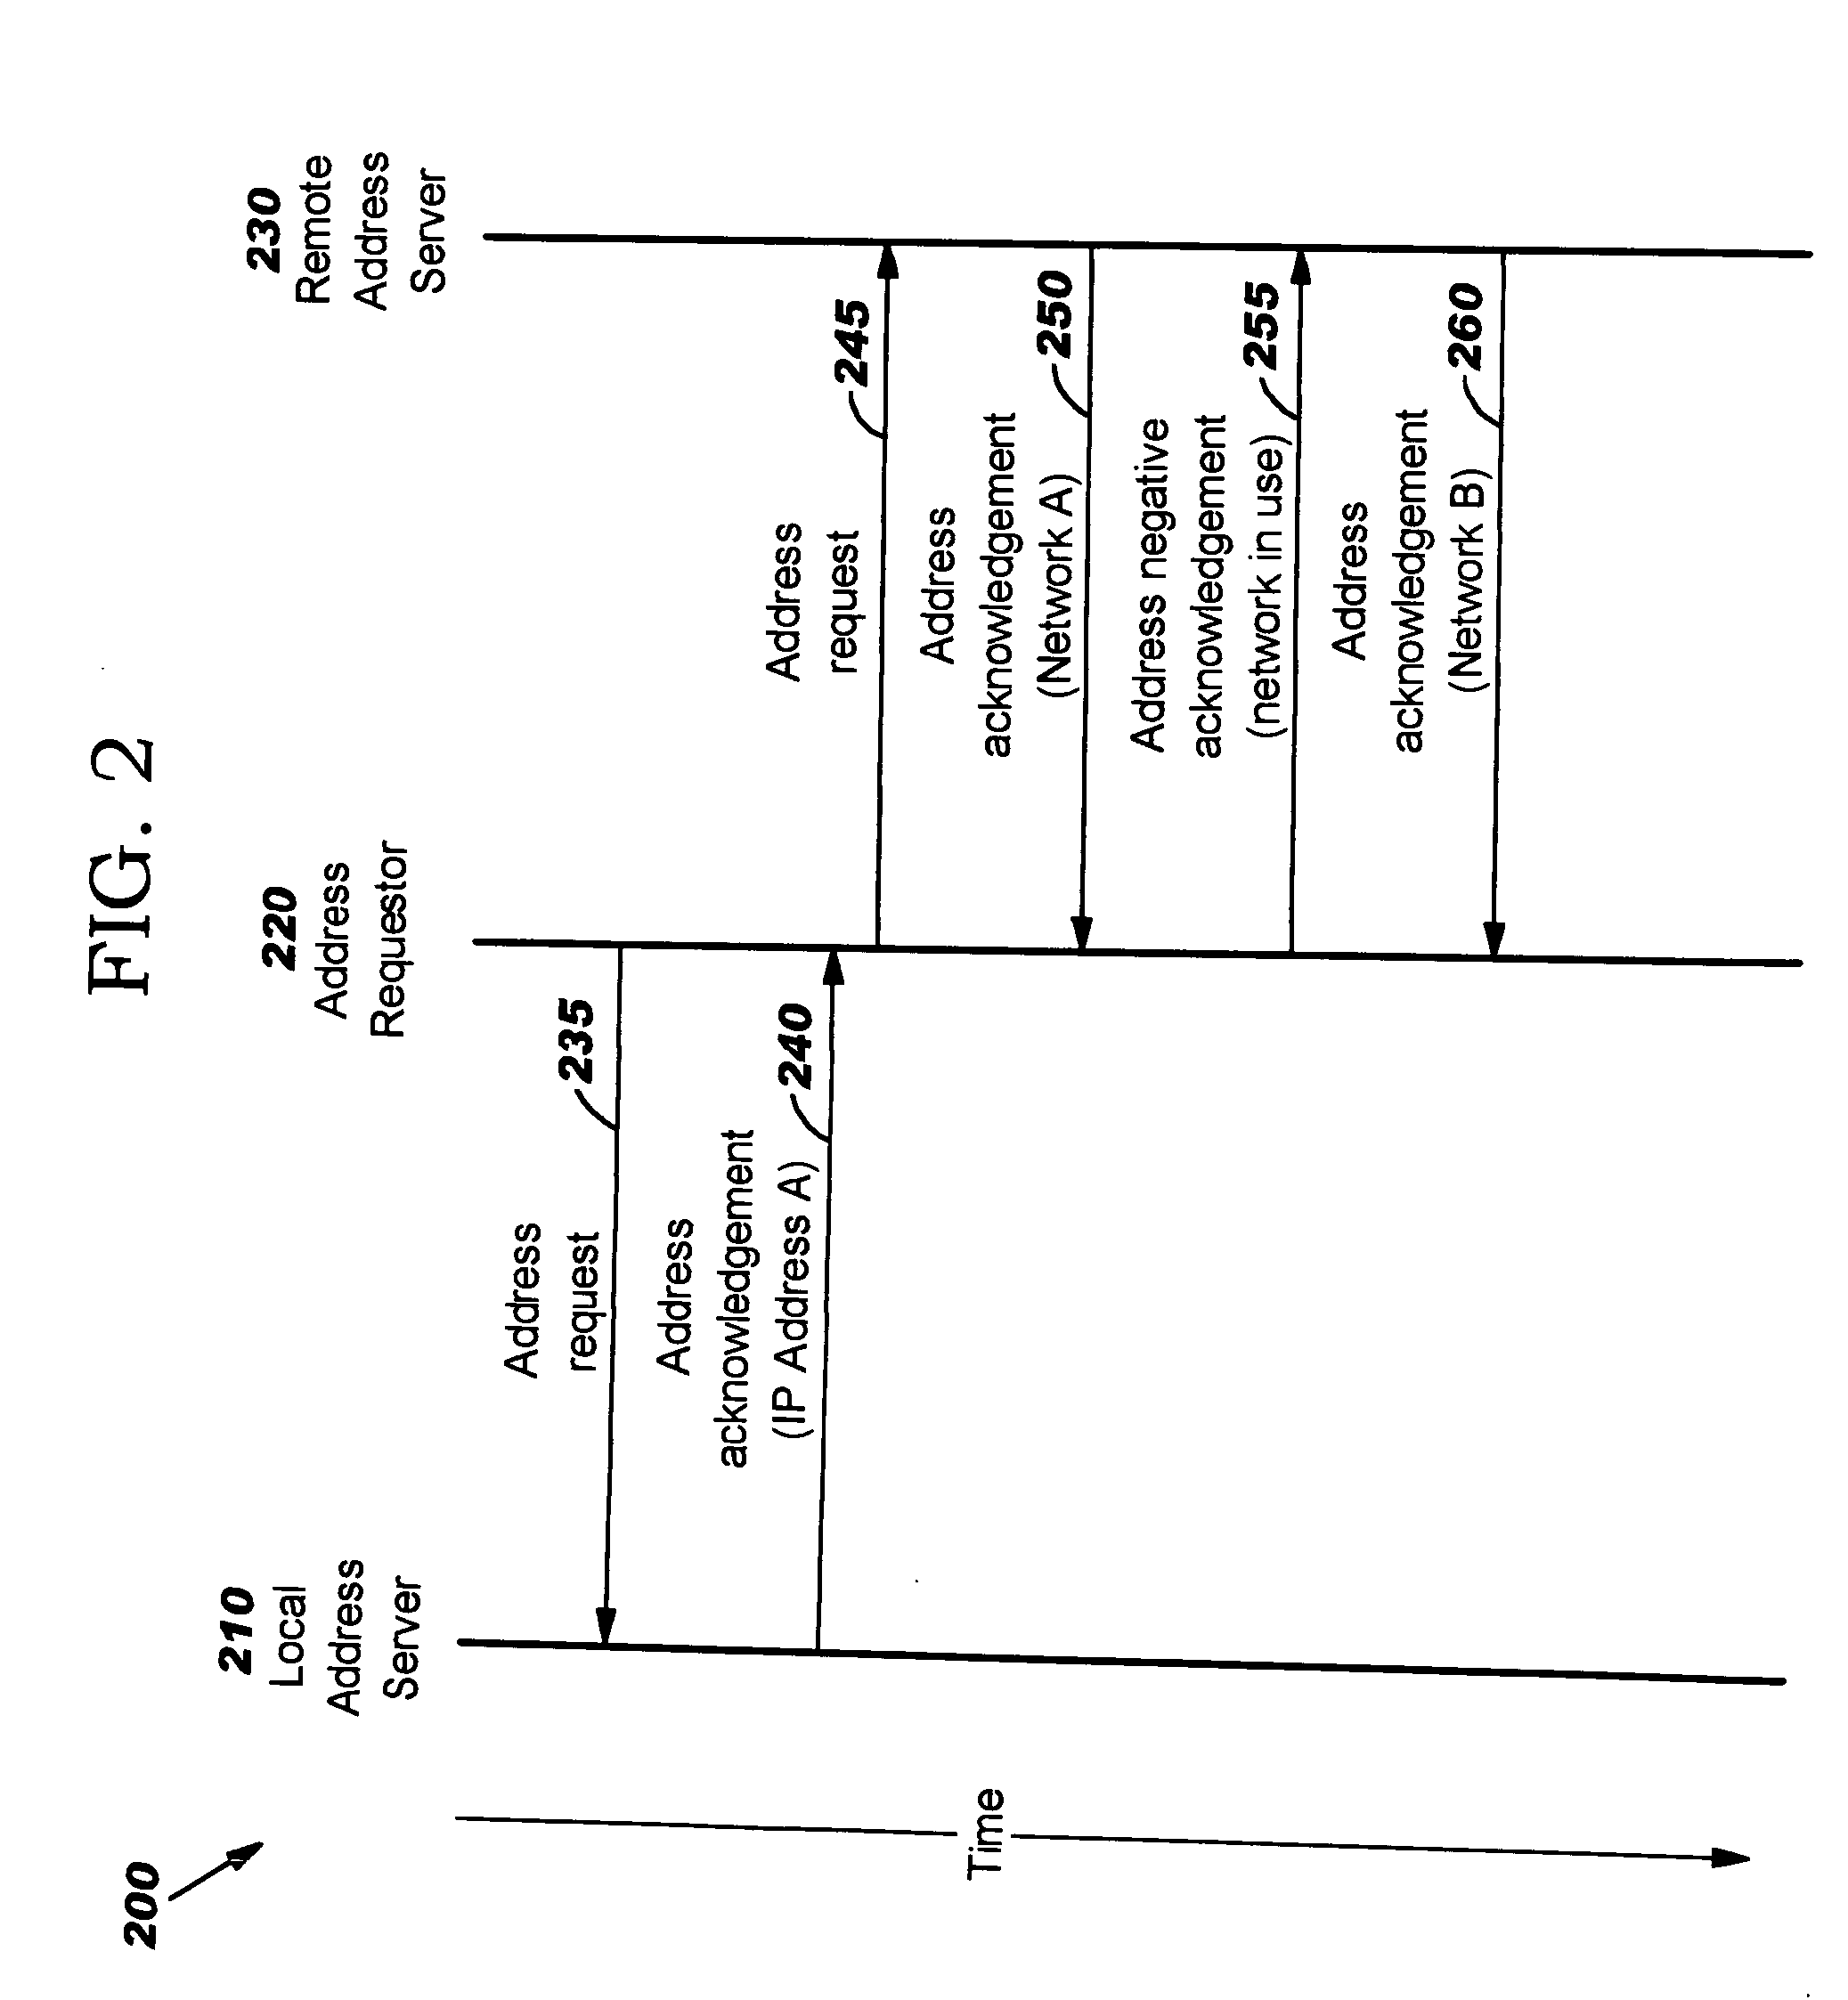 Systems, Methods, and Computer Readable Medium for Avoiding a Network Address Collision